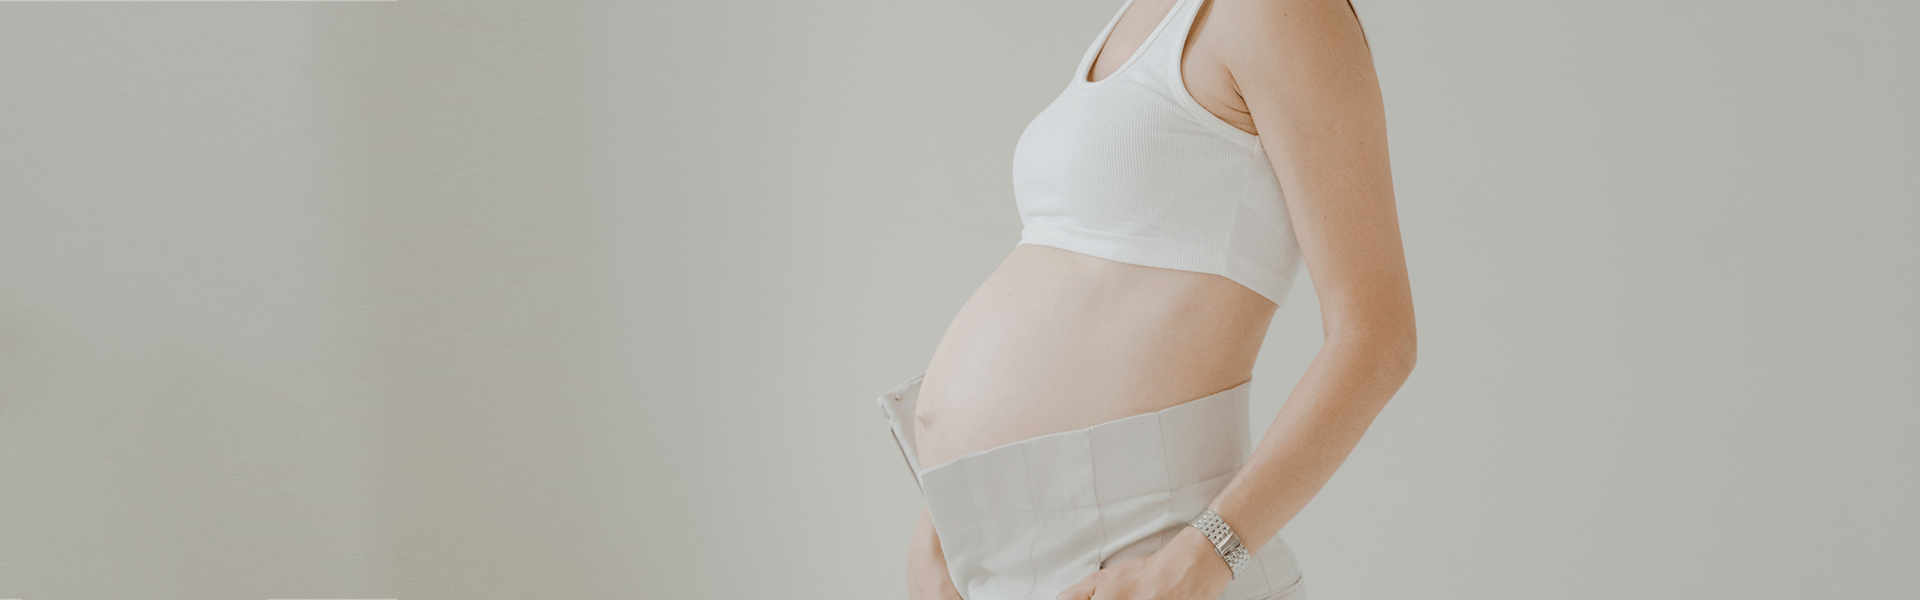 Pregnancy Acne: 6 Organic Home Remedies That Are Safe For You & Your Baby